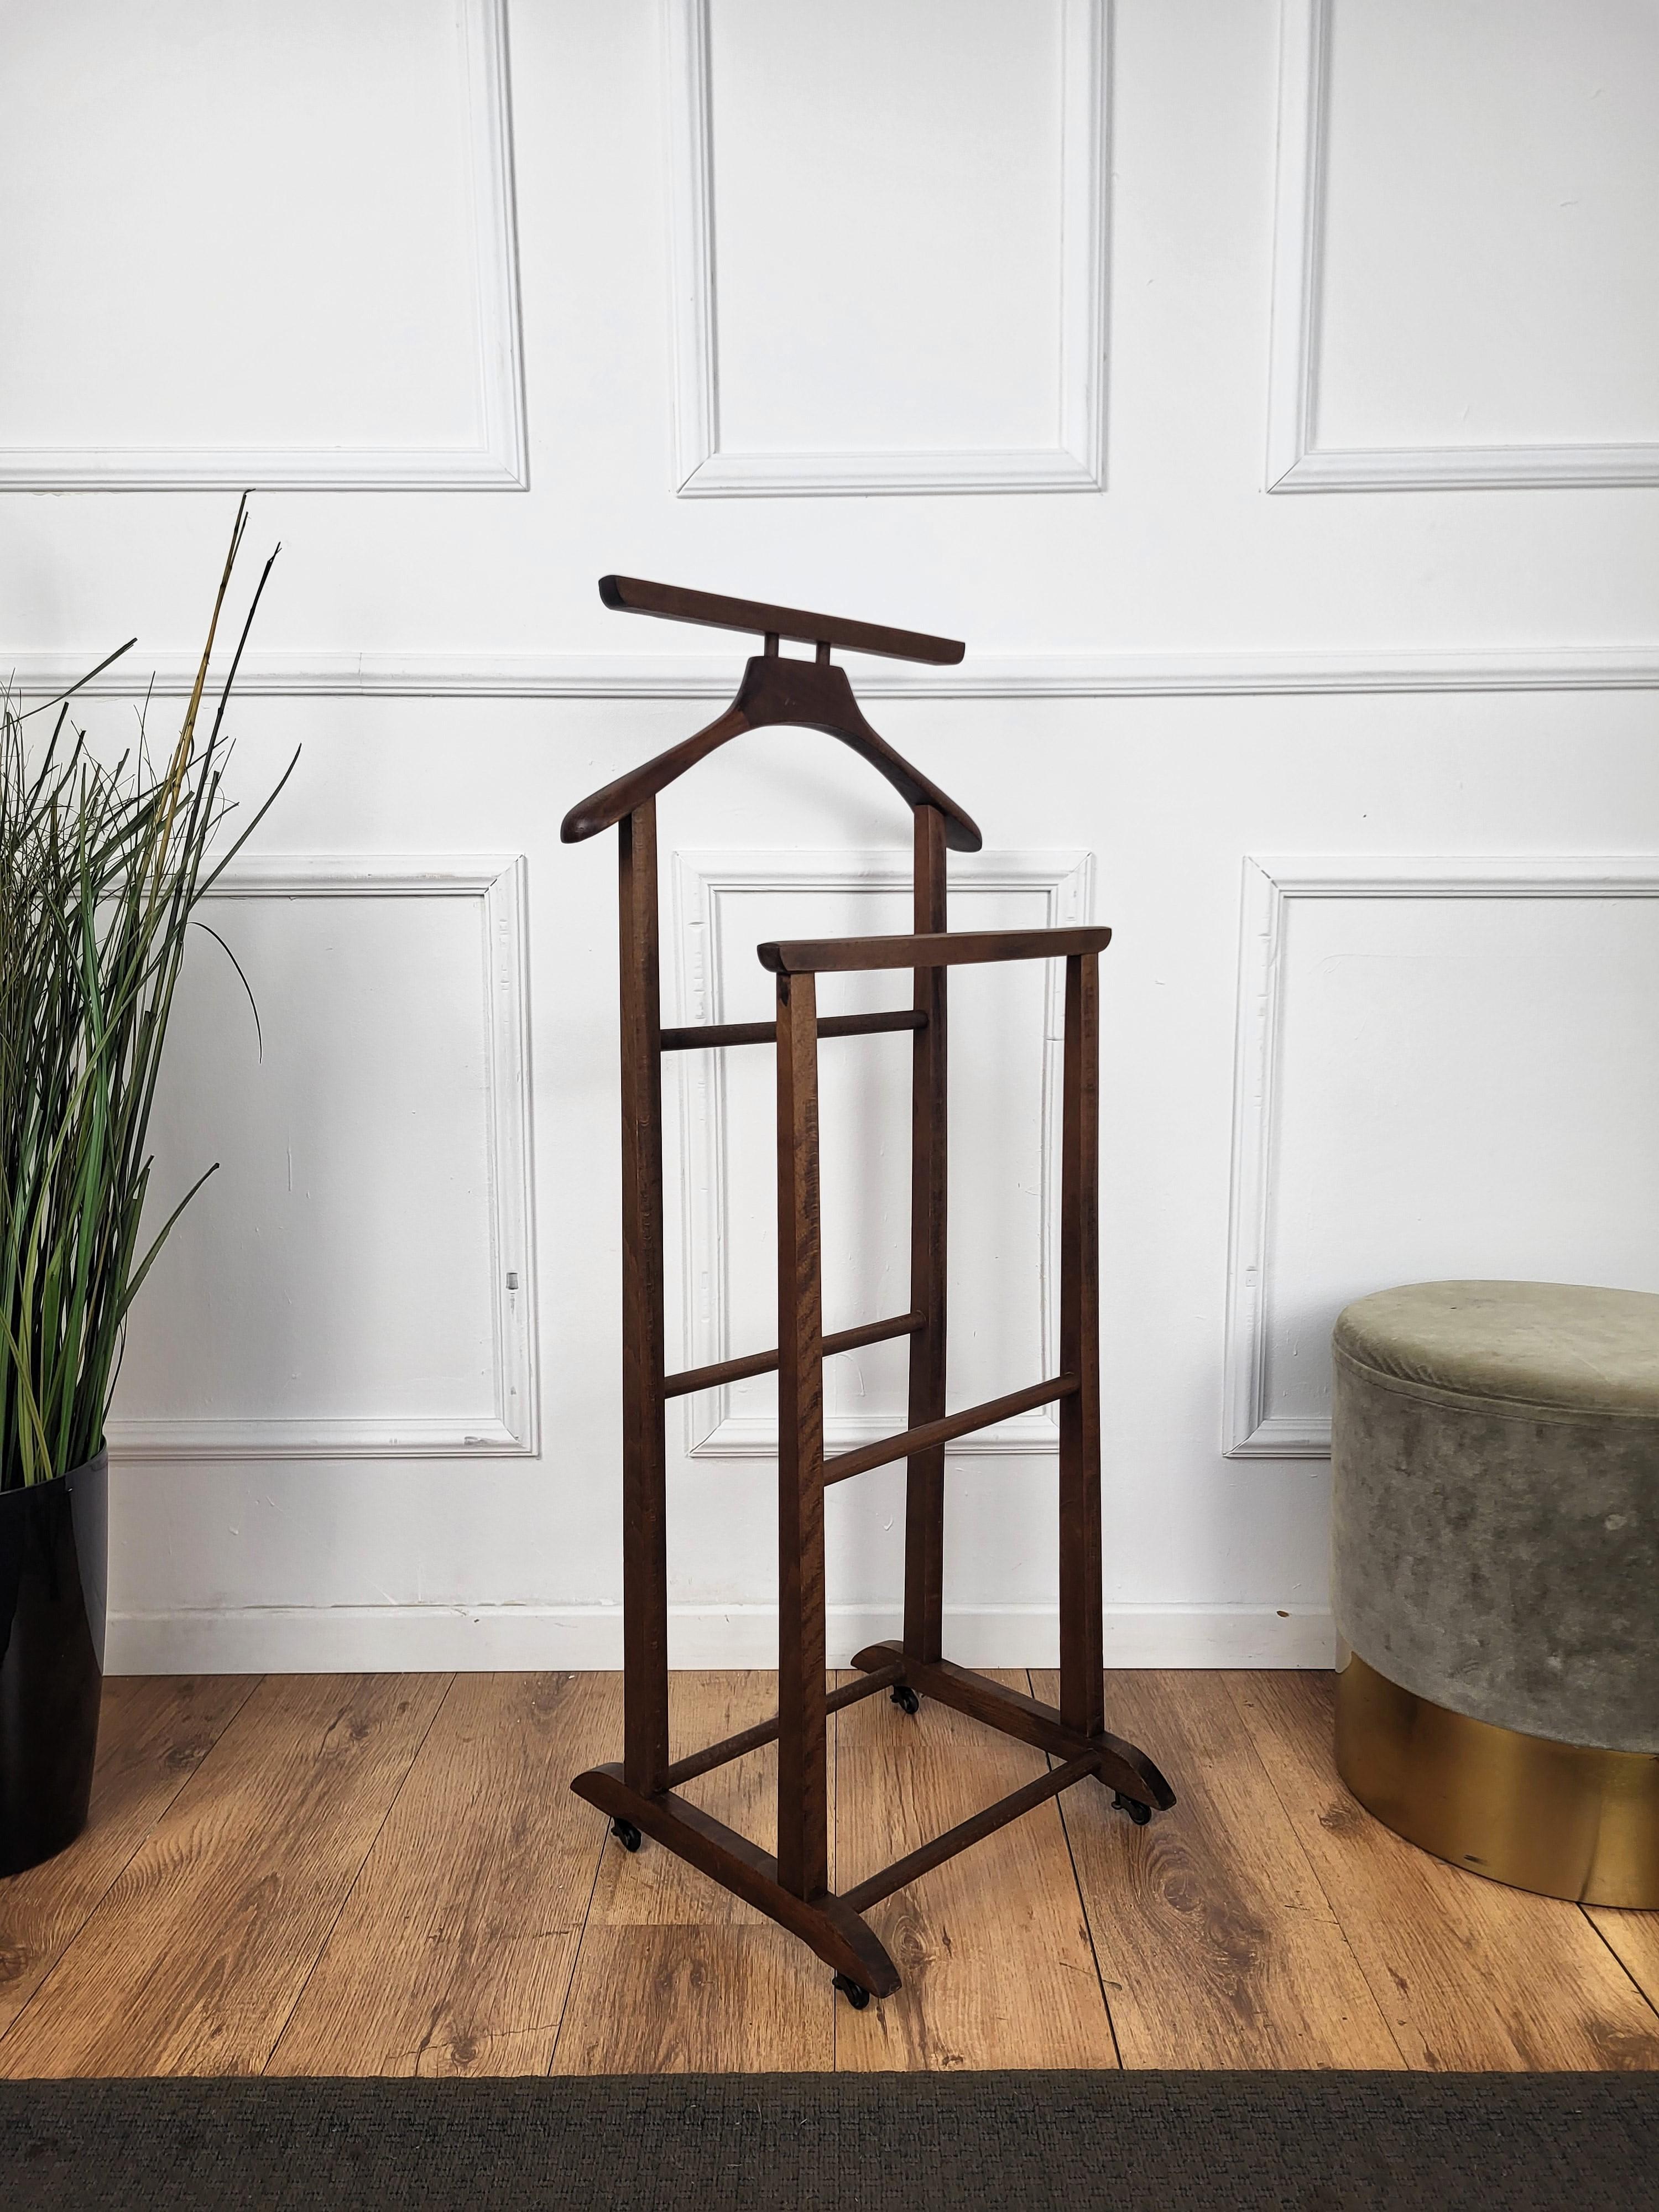 Vintage 1970s Italian wood dressboy valet stand, with classic carved column and pedestals completed by the fine and elegant 4 small brass wheels. Easy to carry.